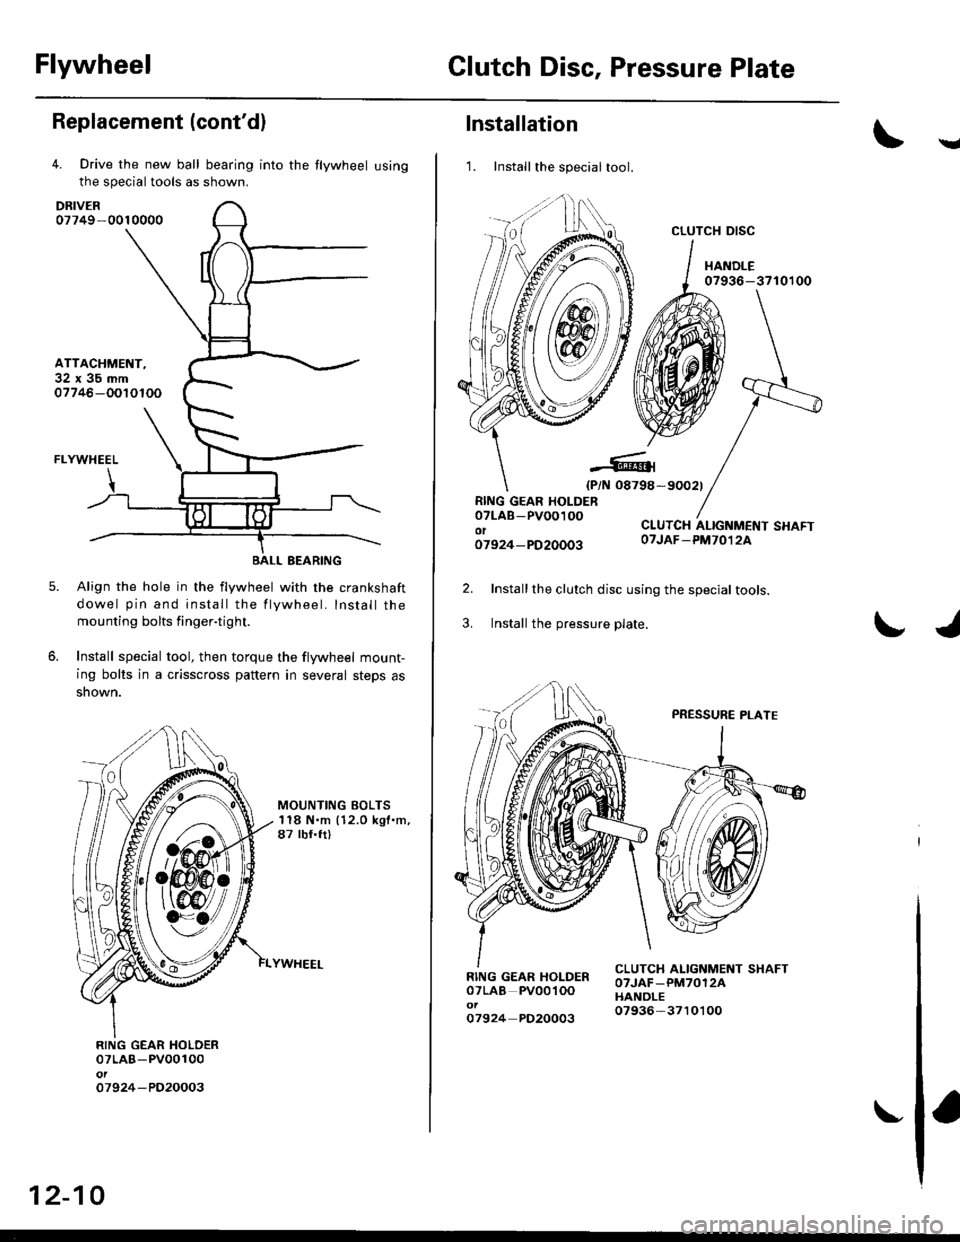 HONDA CIVIC 1996 6.G Workshop Manual FlywheelClutch Disc, Pressure Plate
Replacement (contdl
4. Drive the new ball bearing into the flywheel using
the special tools as shown.
DRIVER07749-0010000
ATTACHMENT,32x35mm07746-OOIOTOO
FLYWHEEL
